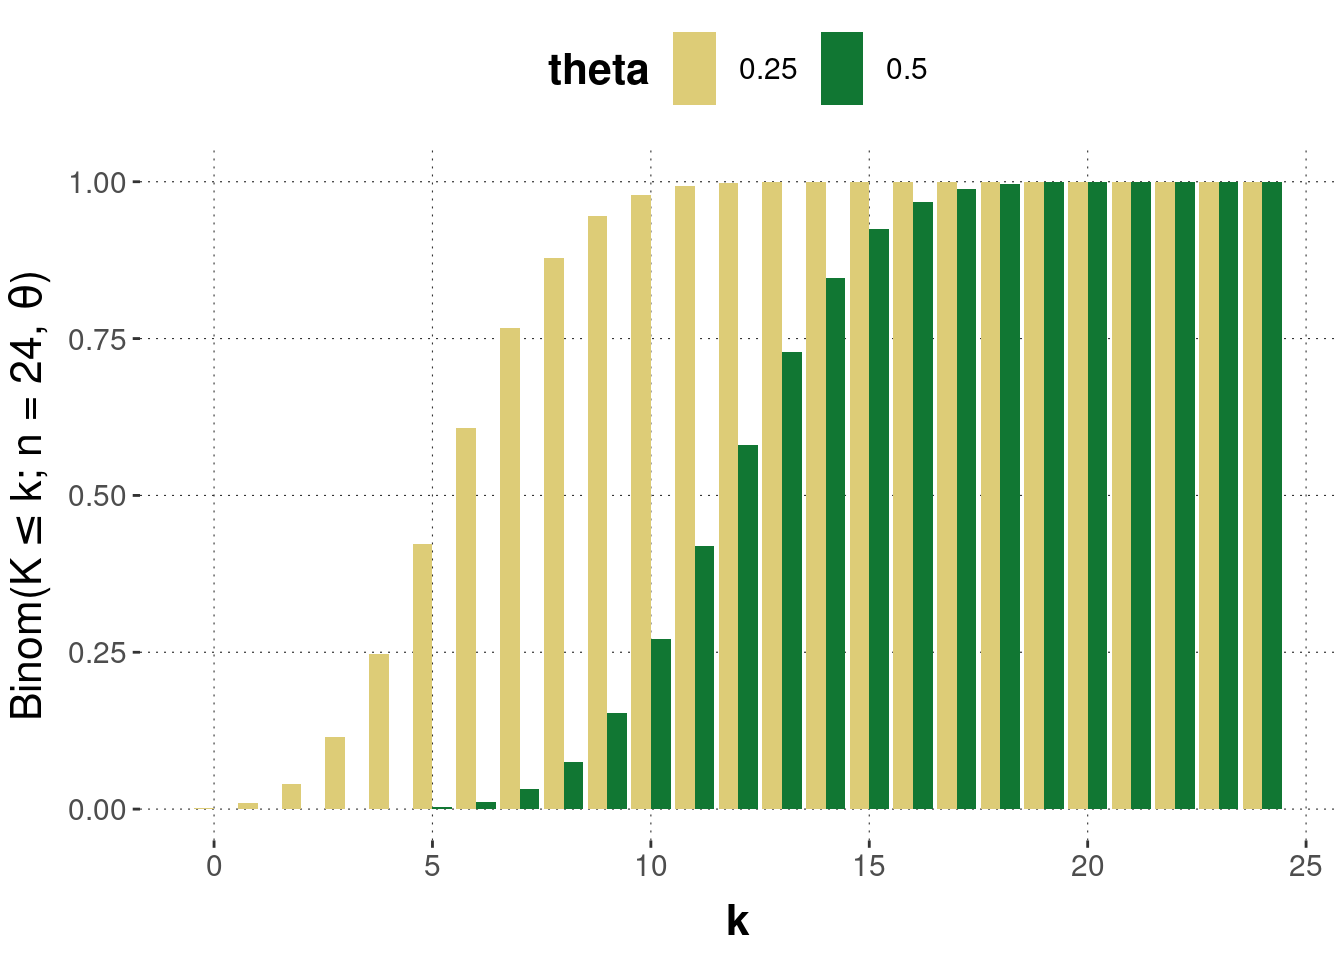 Examples of the cumulative distribution of the Binomial distribution. The $y$-axis gives the probability of seeing $k$ or fewer outcomes of heads when flipping a coin $n=24$ times with a bias of either $\theta = 0.25$ or $\theta = 0.5$.